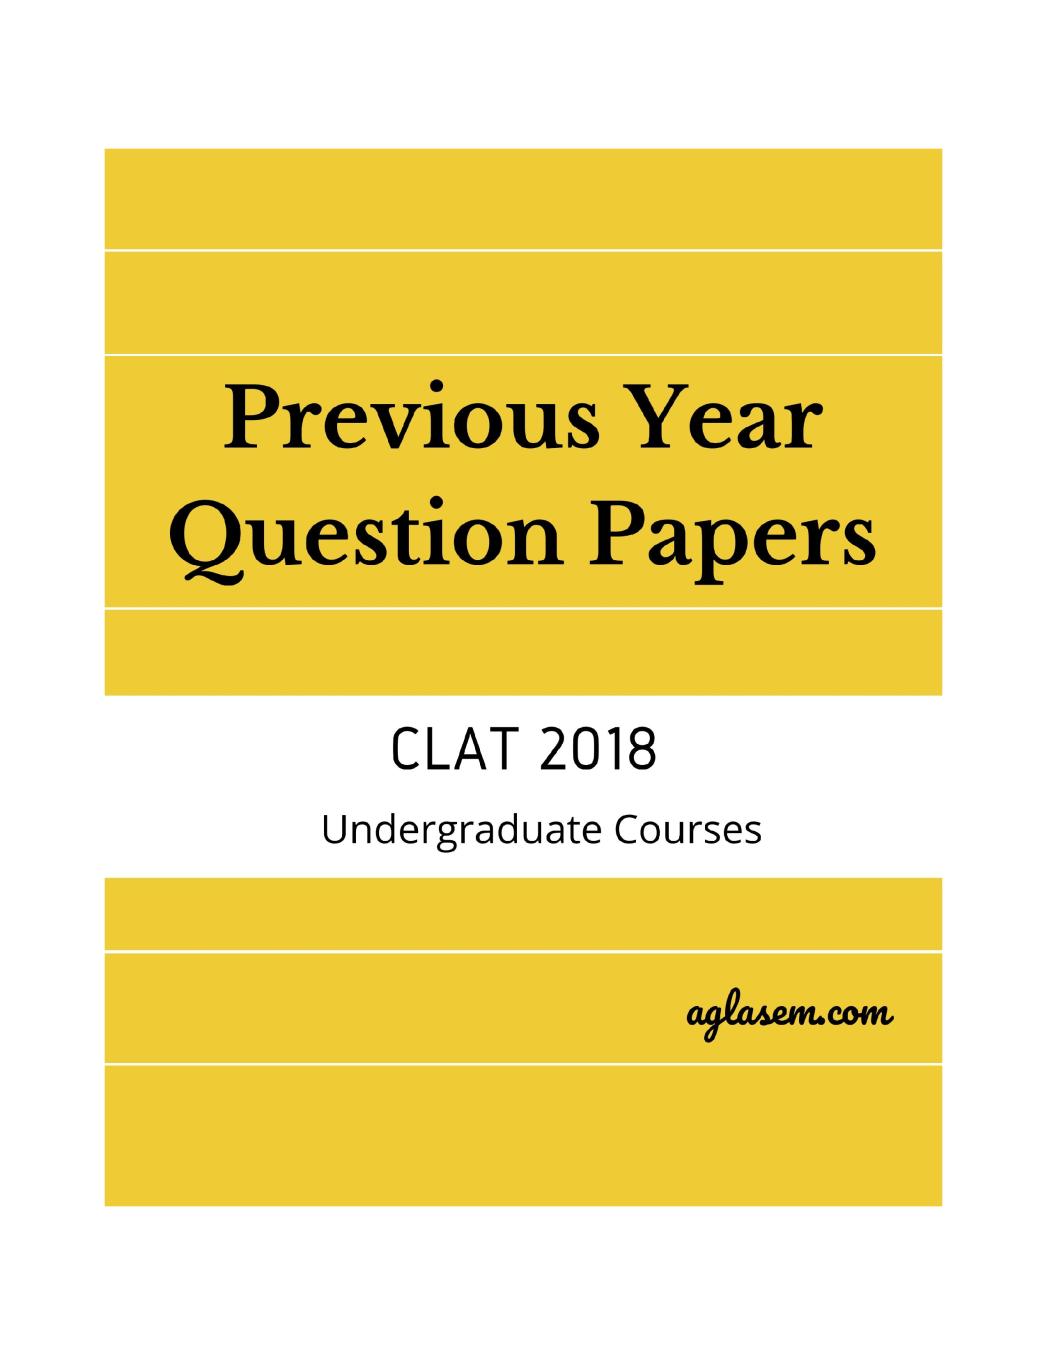 CLAT 2018 Question Paper with Anwers - Page 1